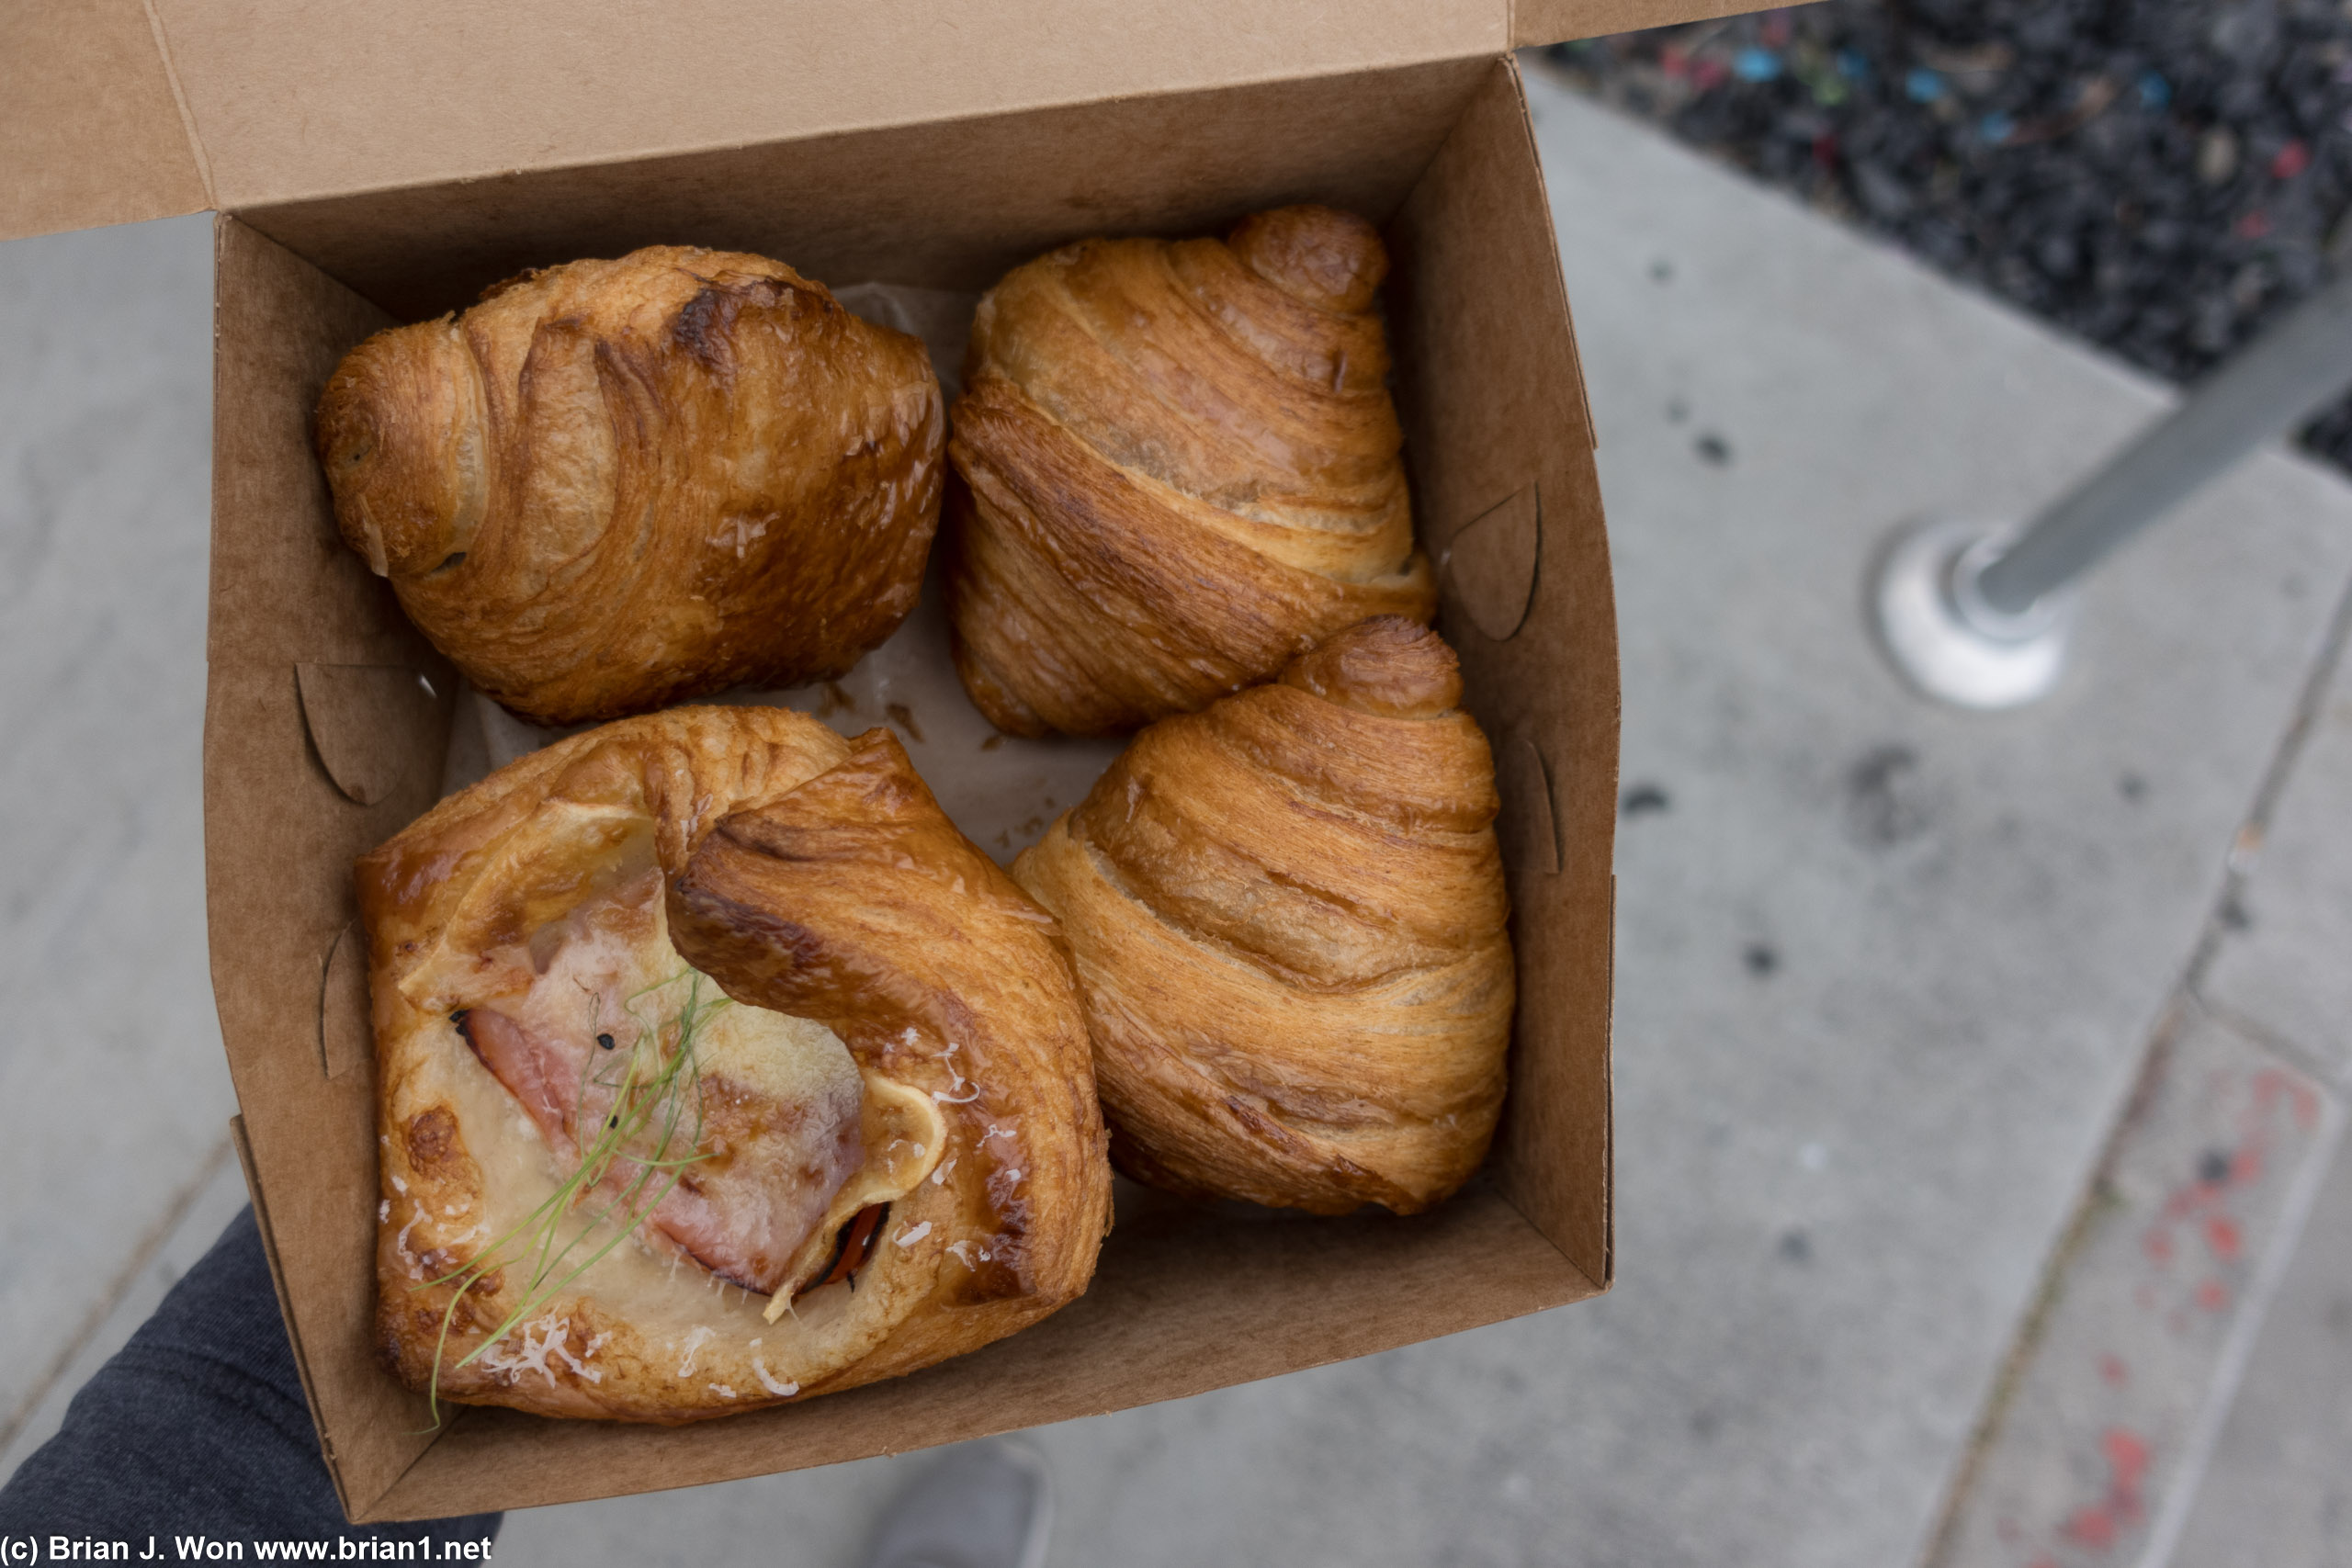 Clockwise from ham and cheese, pain au chocolat, regular croissant.